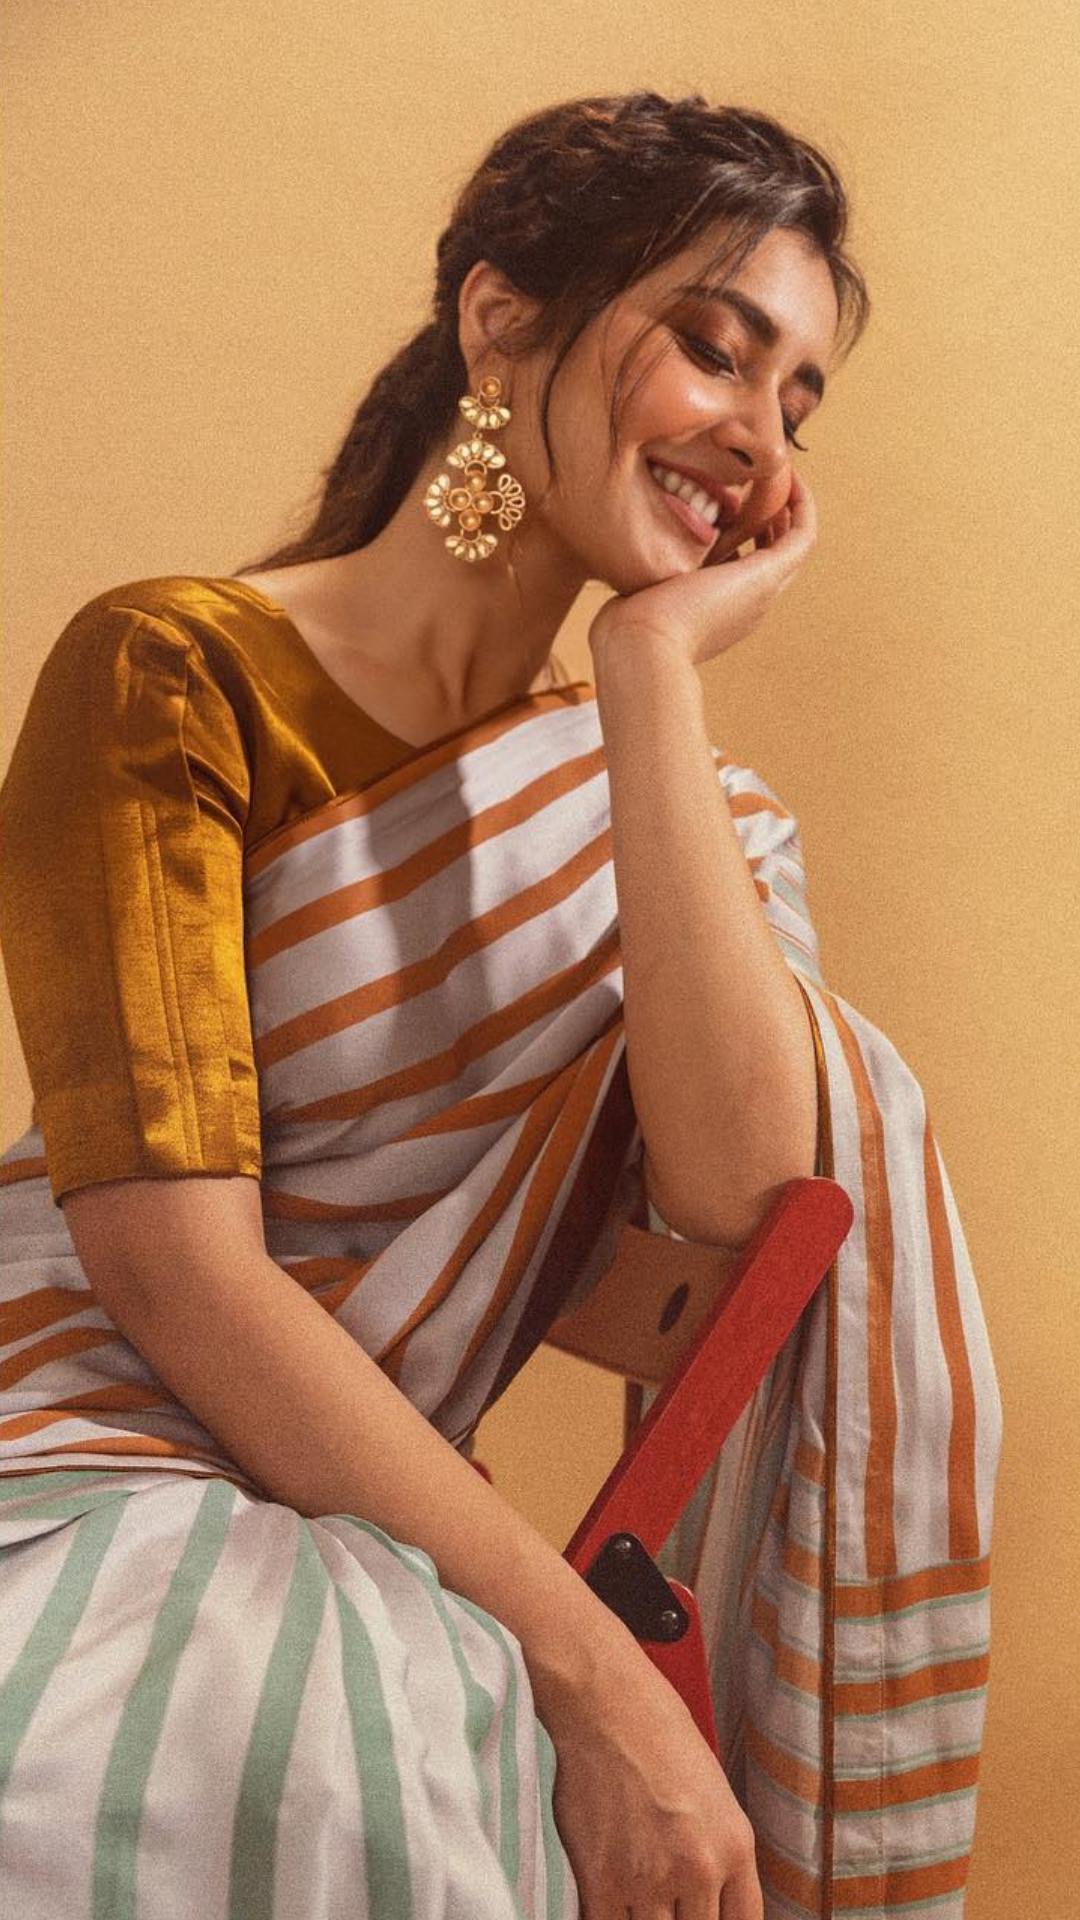 Beyond Basics: 30 Diverse Hairstyles for a Saree